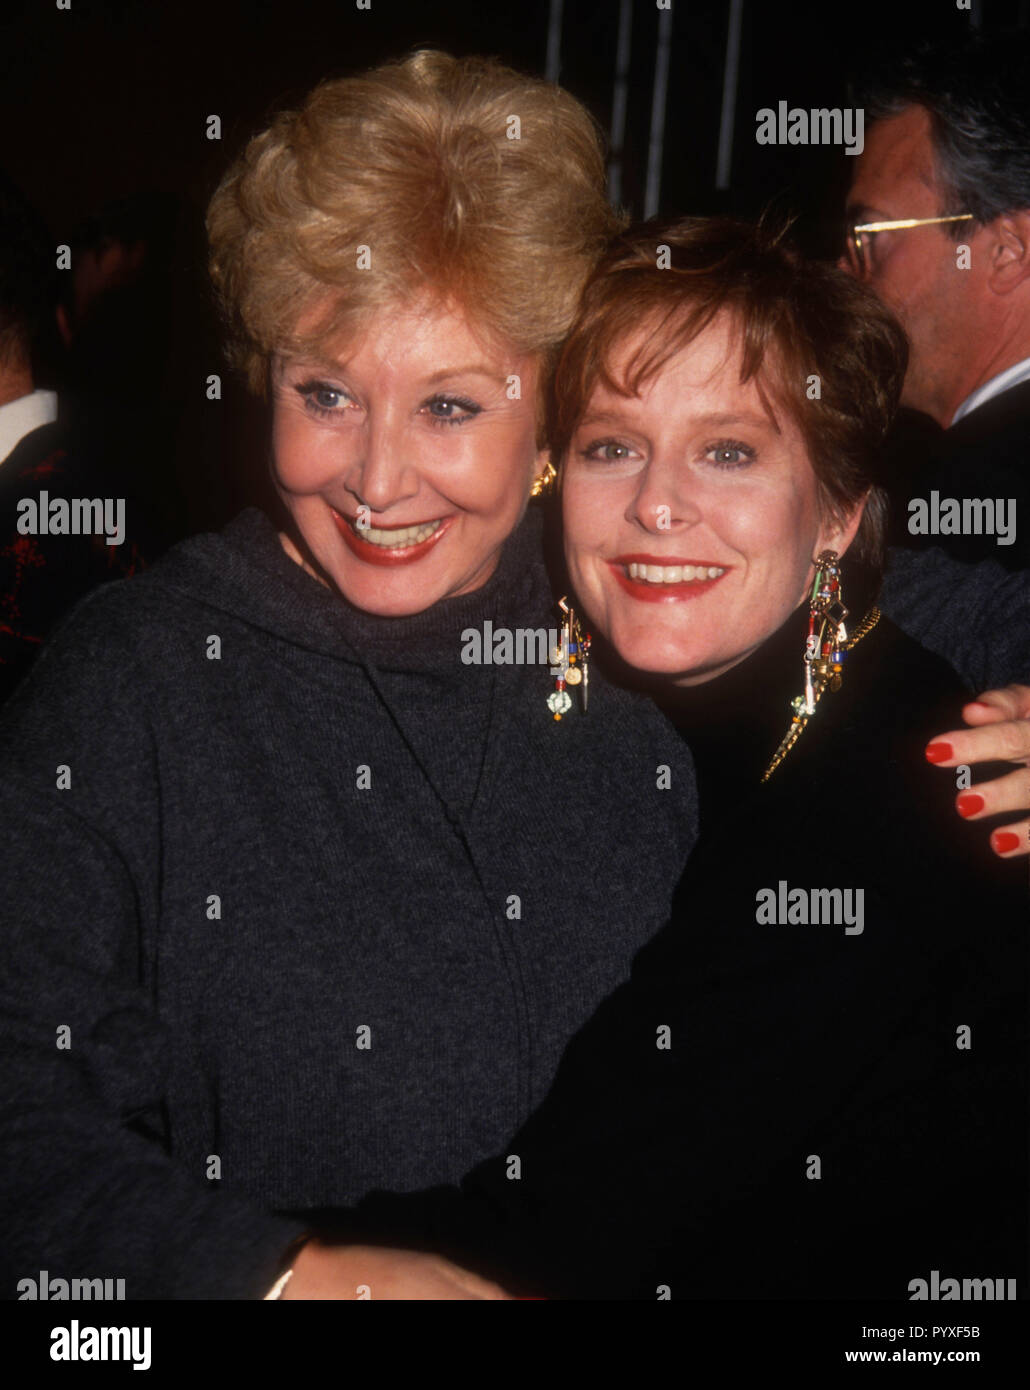 LOS ANGELES, CA - NOVEMBER 9: (L-R) Actresses Michael Learned and Mary McDonough attend the Screening of the CBS Made-for-Televion Movie 'The Man Upstairs' on November 9, 1992 at the DGA Theatre in Los Angeles, California. Photo by Barry King/Alamy Stock Photo Stock Photo